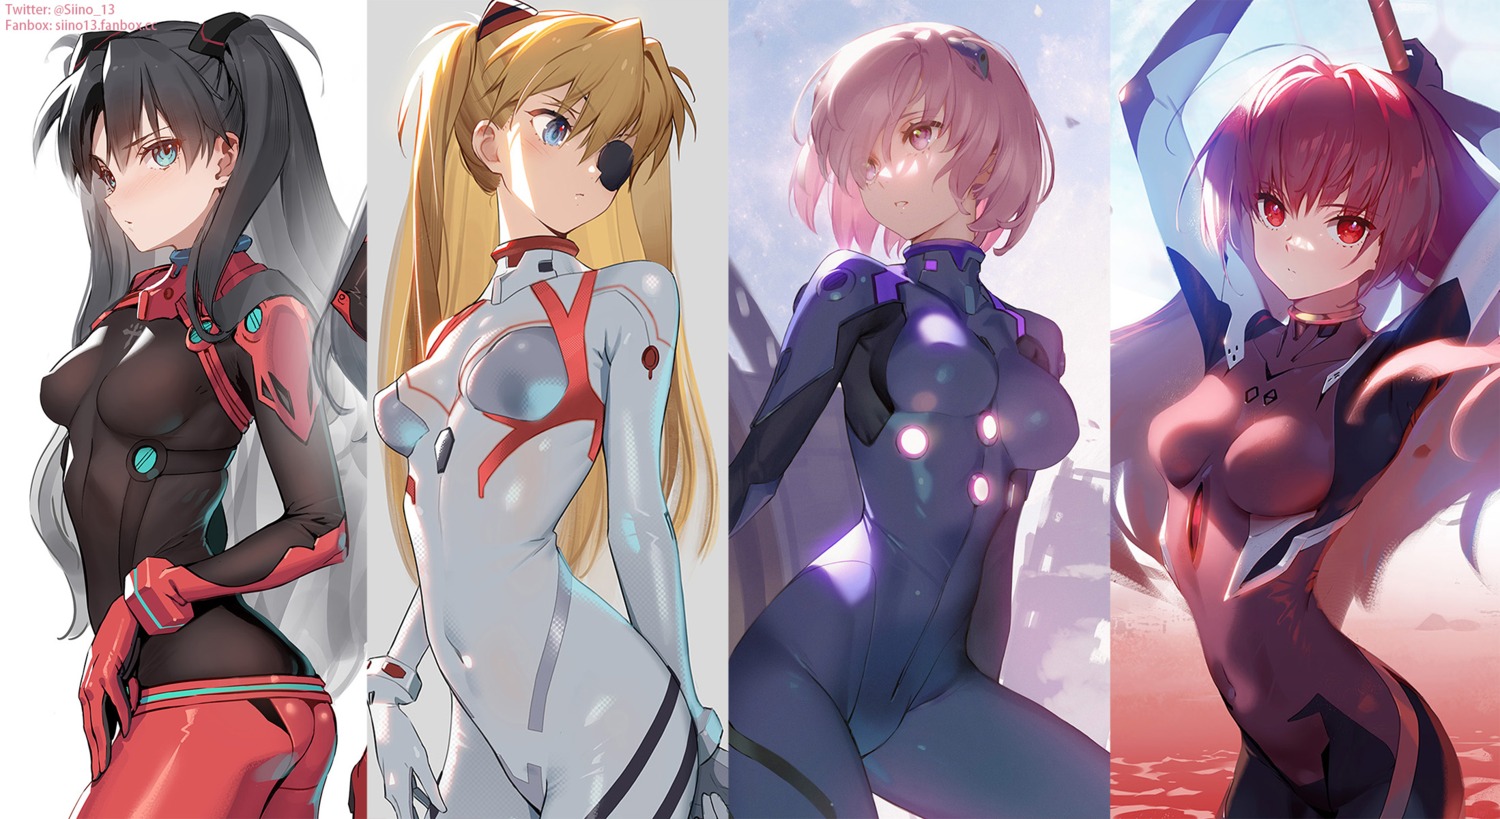 ass ayanami_rei bodysuit cosplay crossover eyepatch fate/grand_order fate/stay_night mash_kyrielight neon_genesis_evangelion scathach_(fate/grand_order) siino souryuu_asuka_langley toosaka_rin